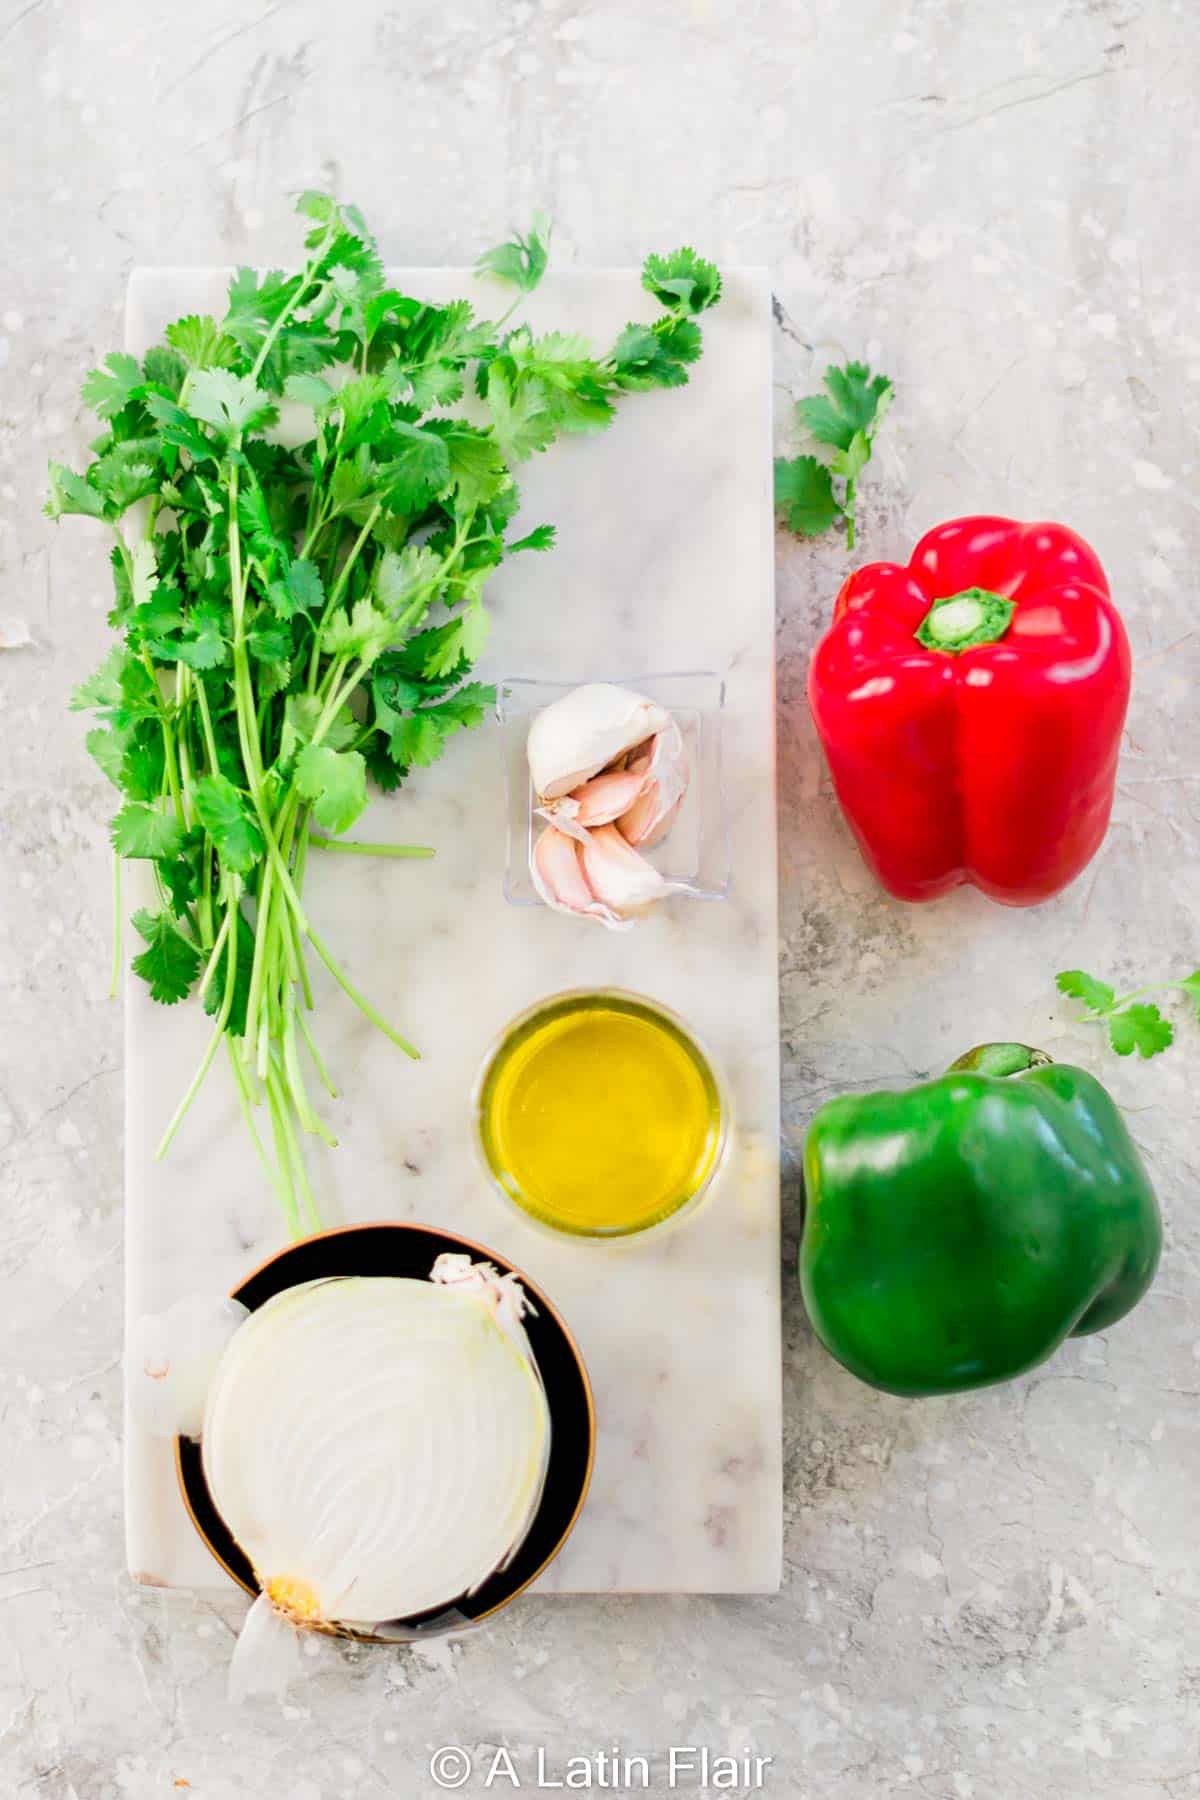 ingredients-for-homemade-puerto-rican-sofrito-recipe-3
